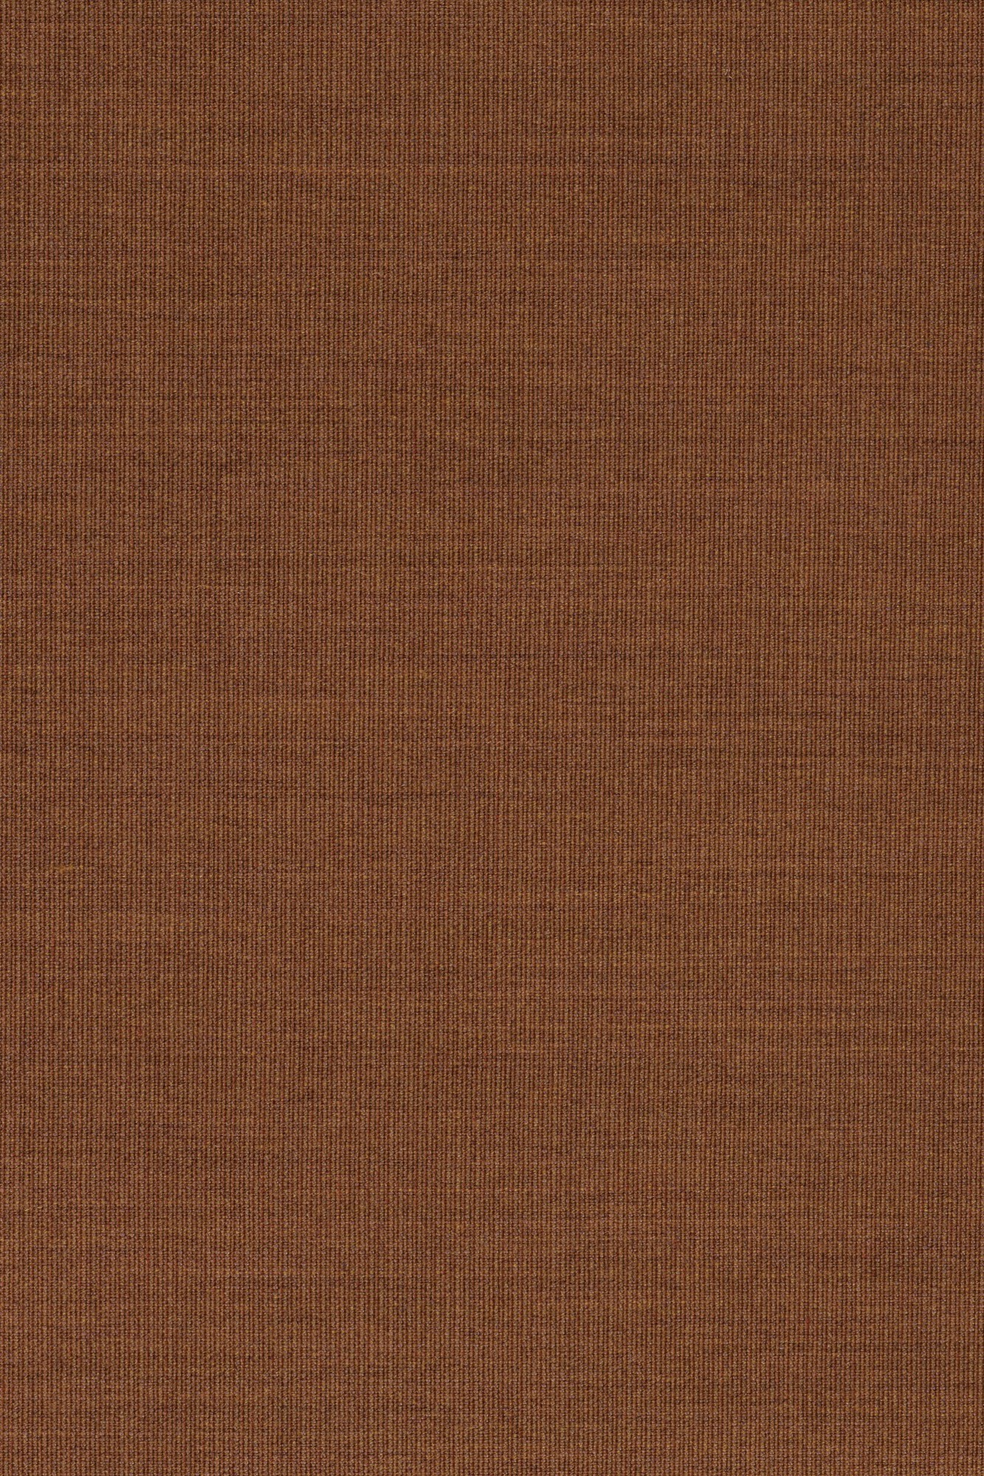 Fabric sample Canvas 2 454 brown